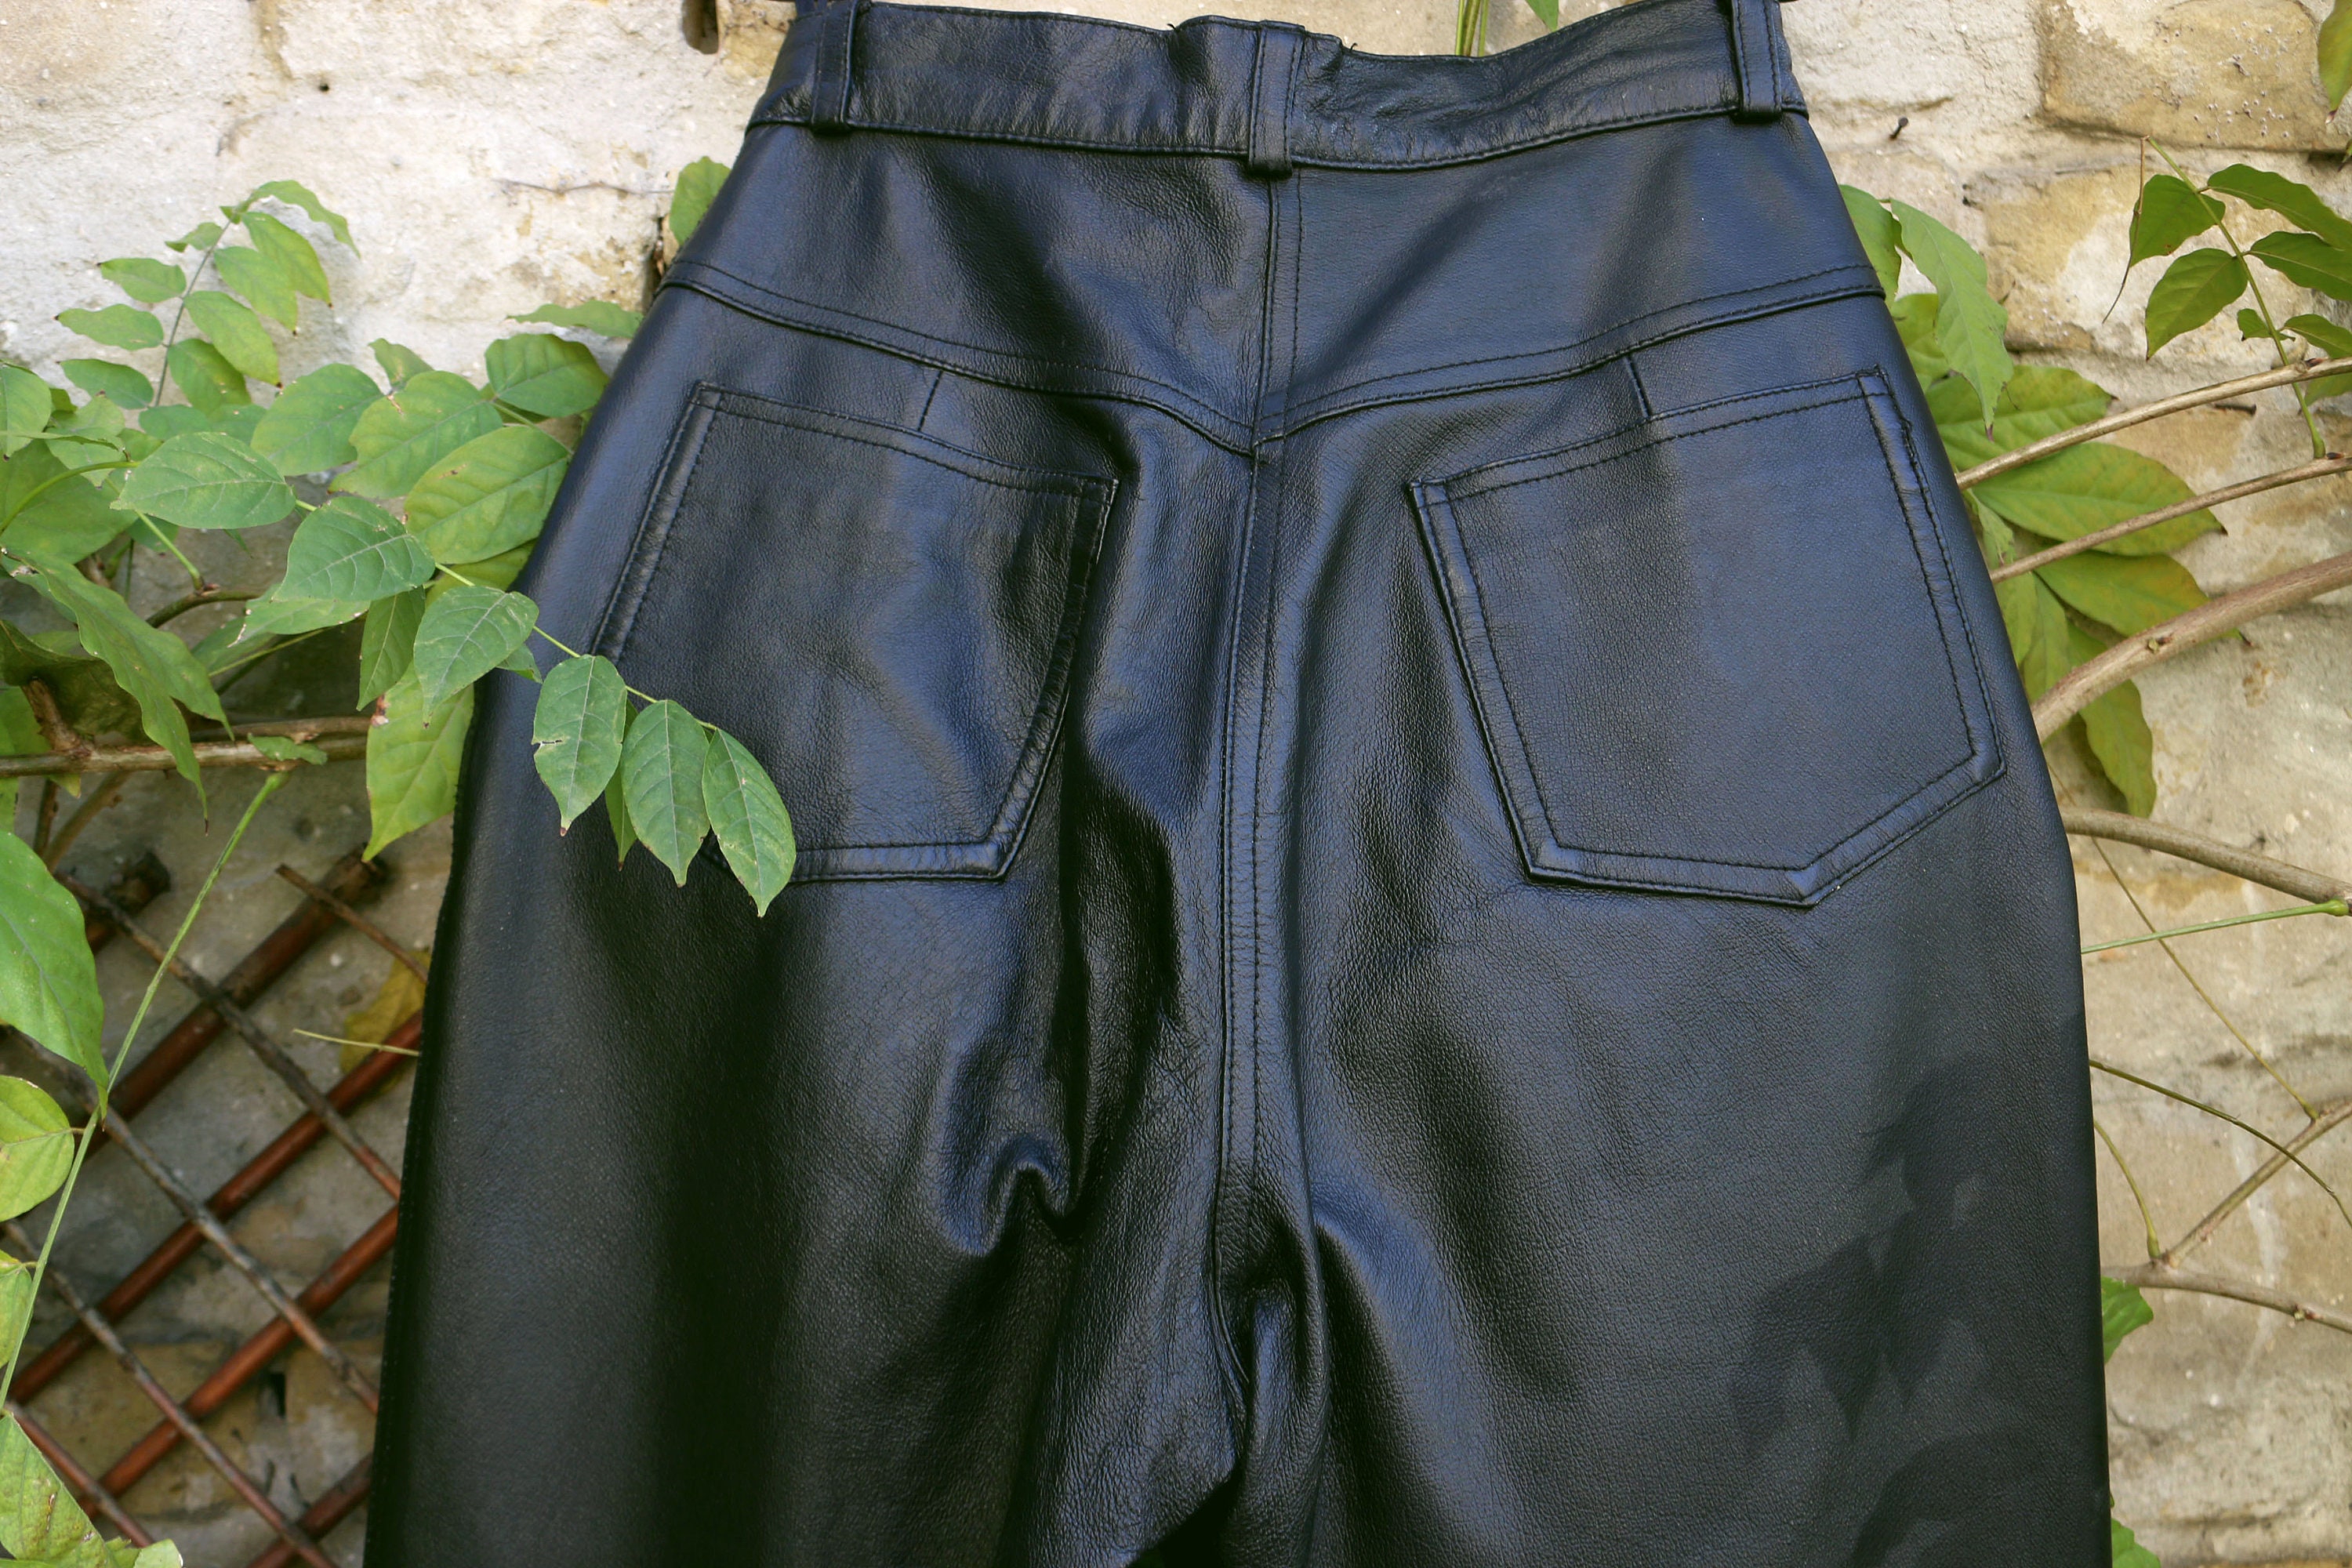 Vintage Leather Pants Women. Real 80s Leather Pants Moto - Etsy